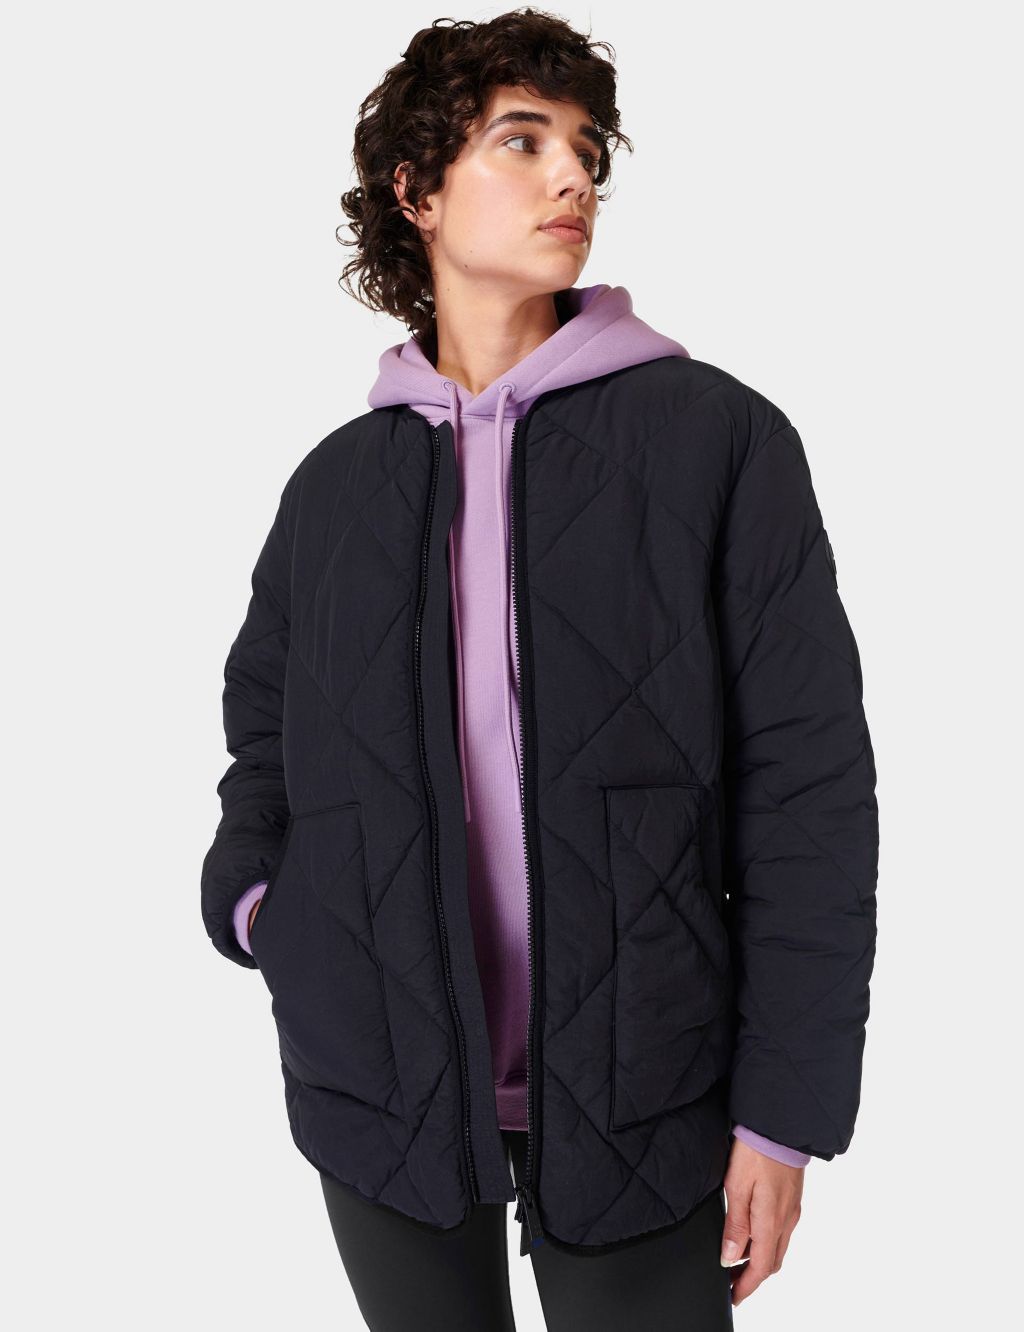 On The Move Quilted Jacket image 1